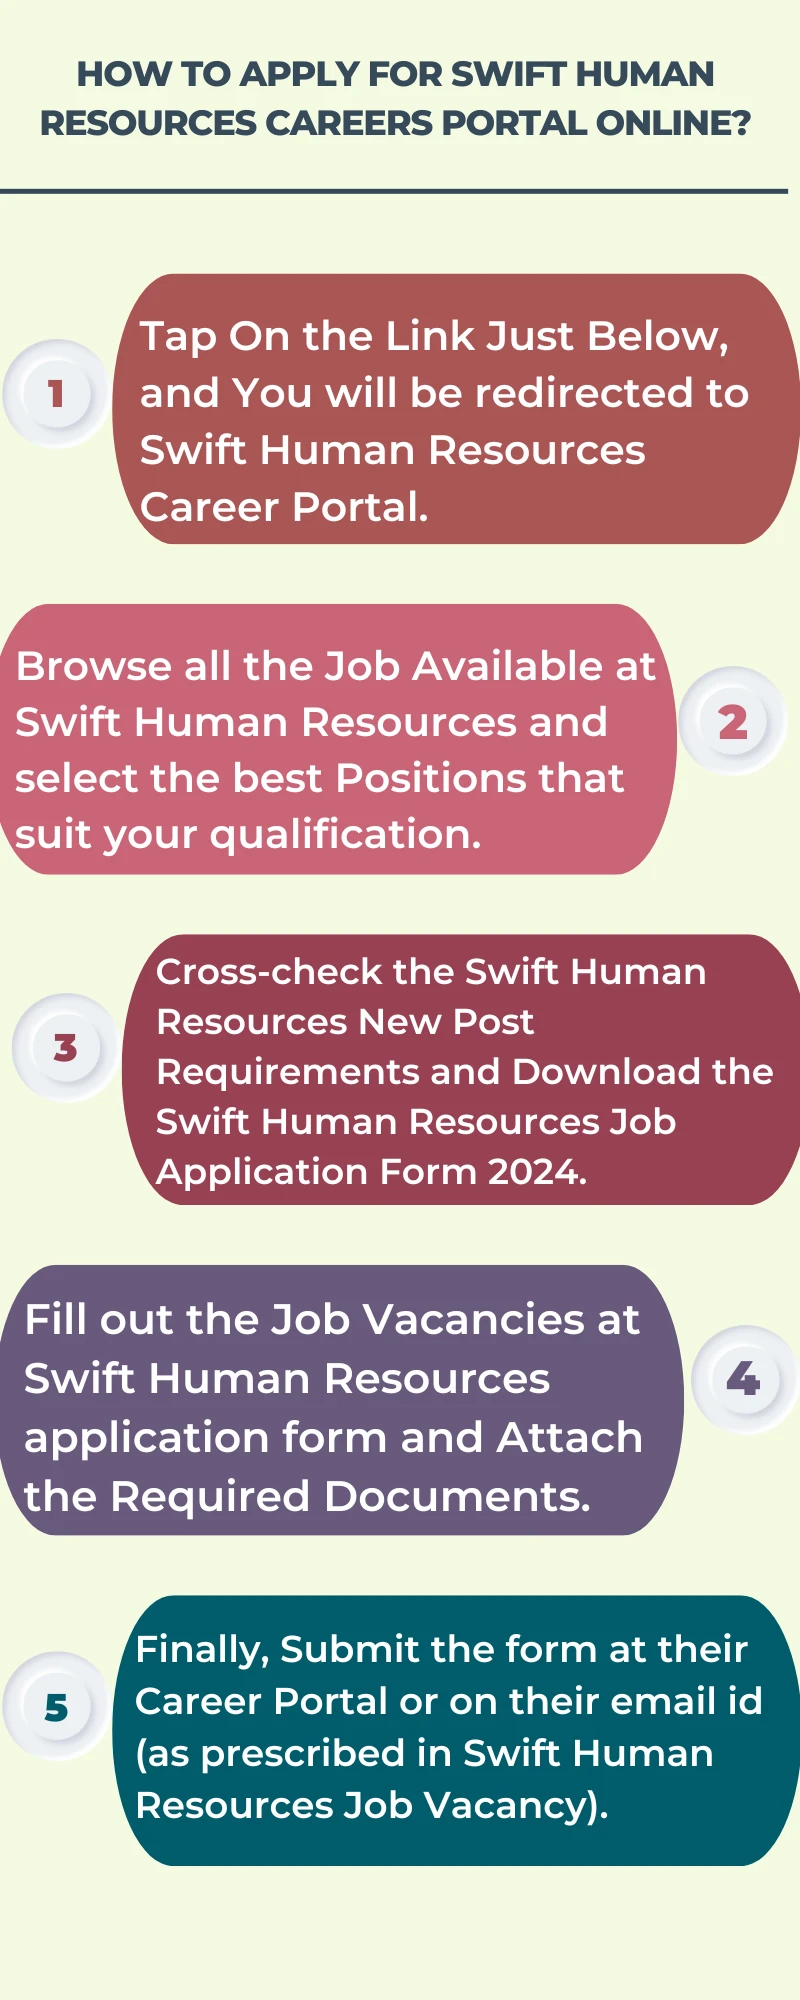 How To Apply for Swift Human Resources Careers Portal Online?